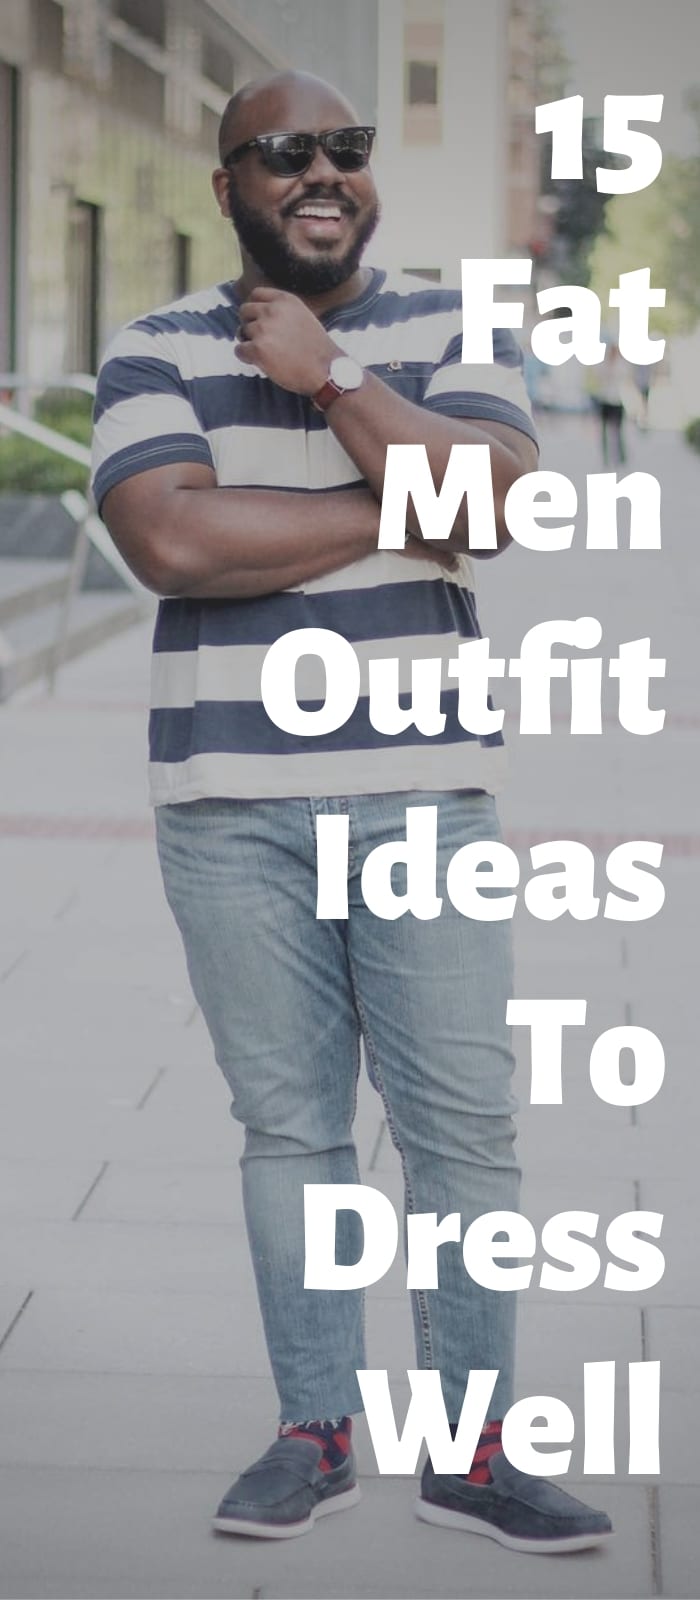 15 Fat Men Outfit Ideas To Dress Well!